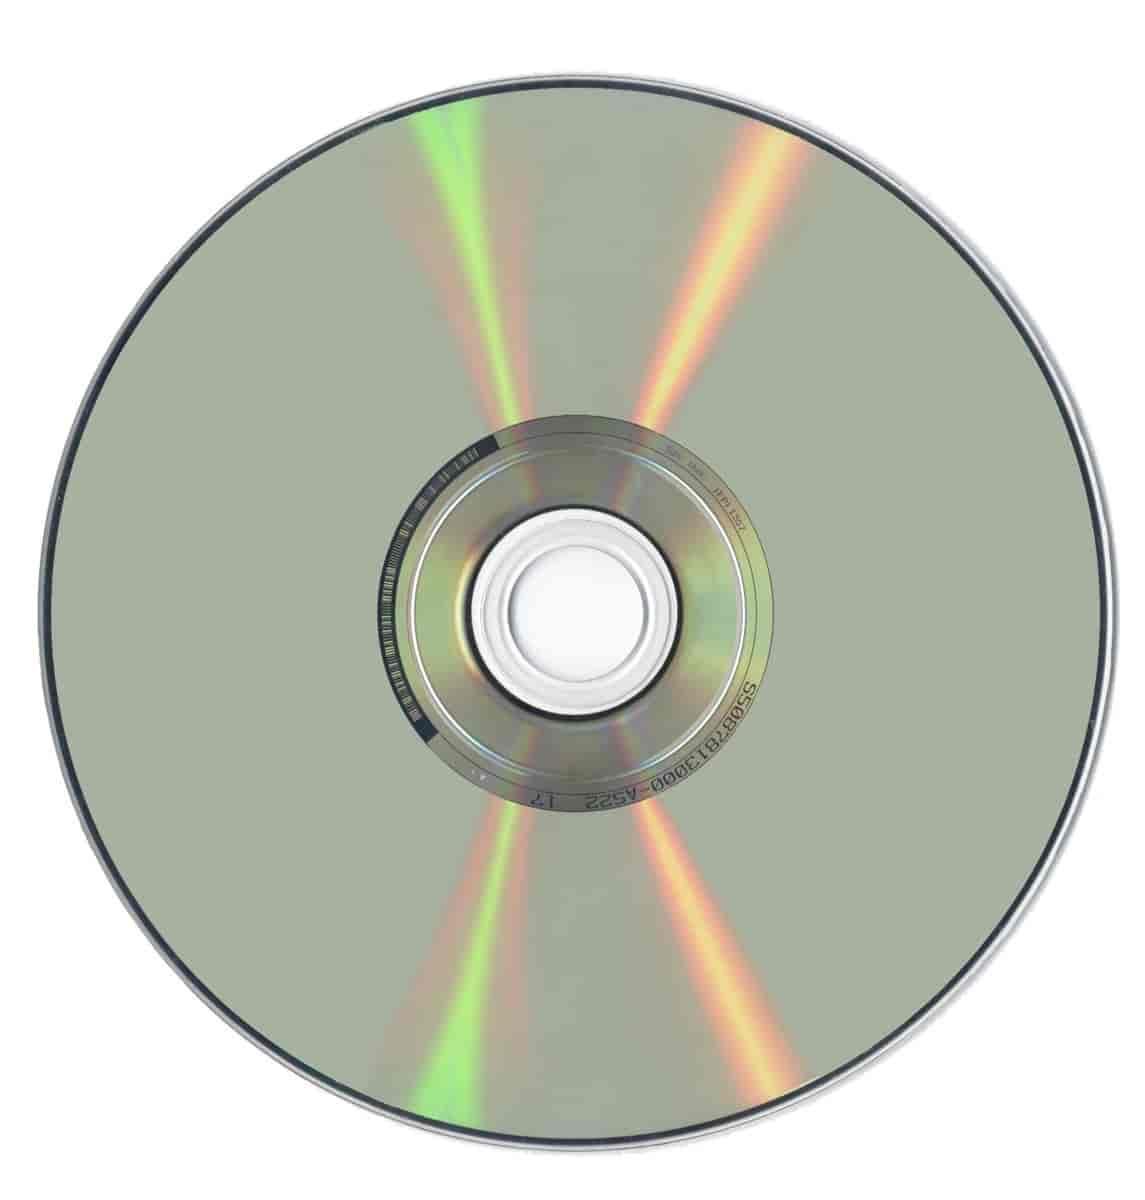 How to Use DVD Shrink